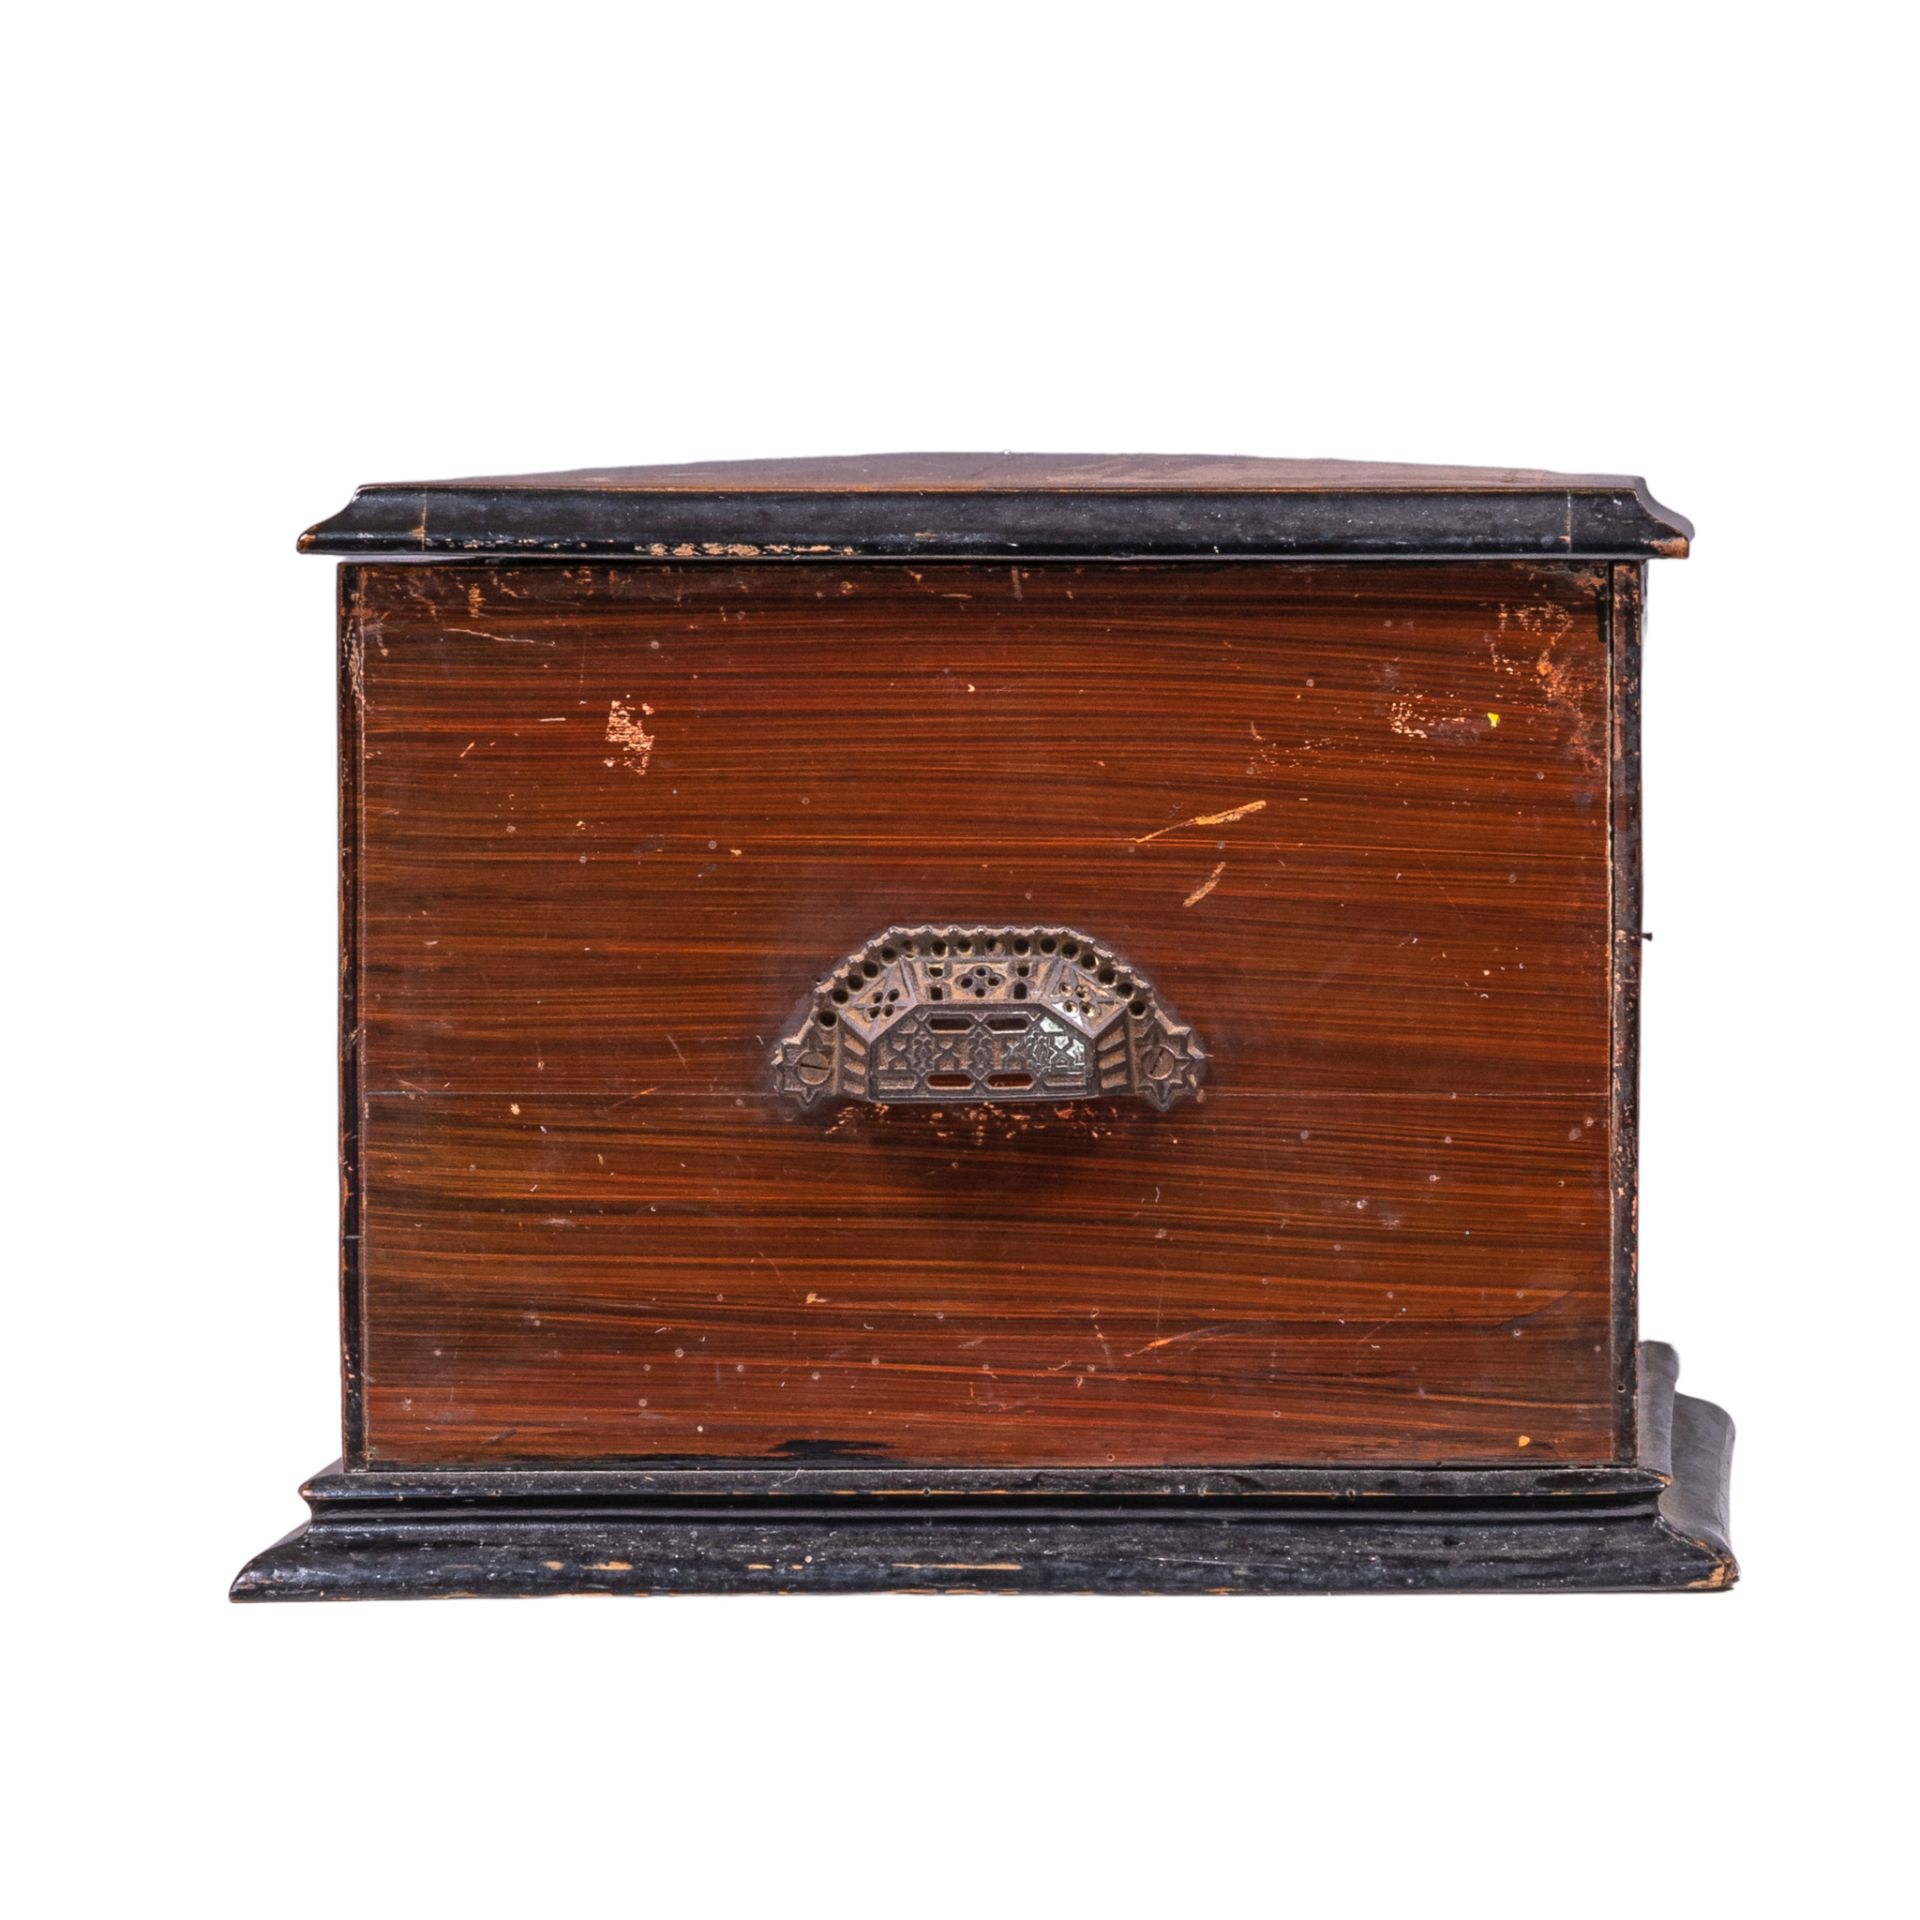 A Victorian mahogany and rosewood veneered cylinder musical box, 1920s, H 28,5 - W 70- D 37 cm - Image 3 of 10